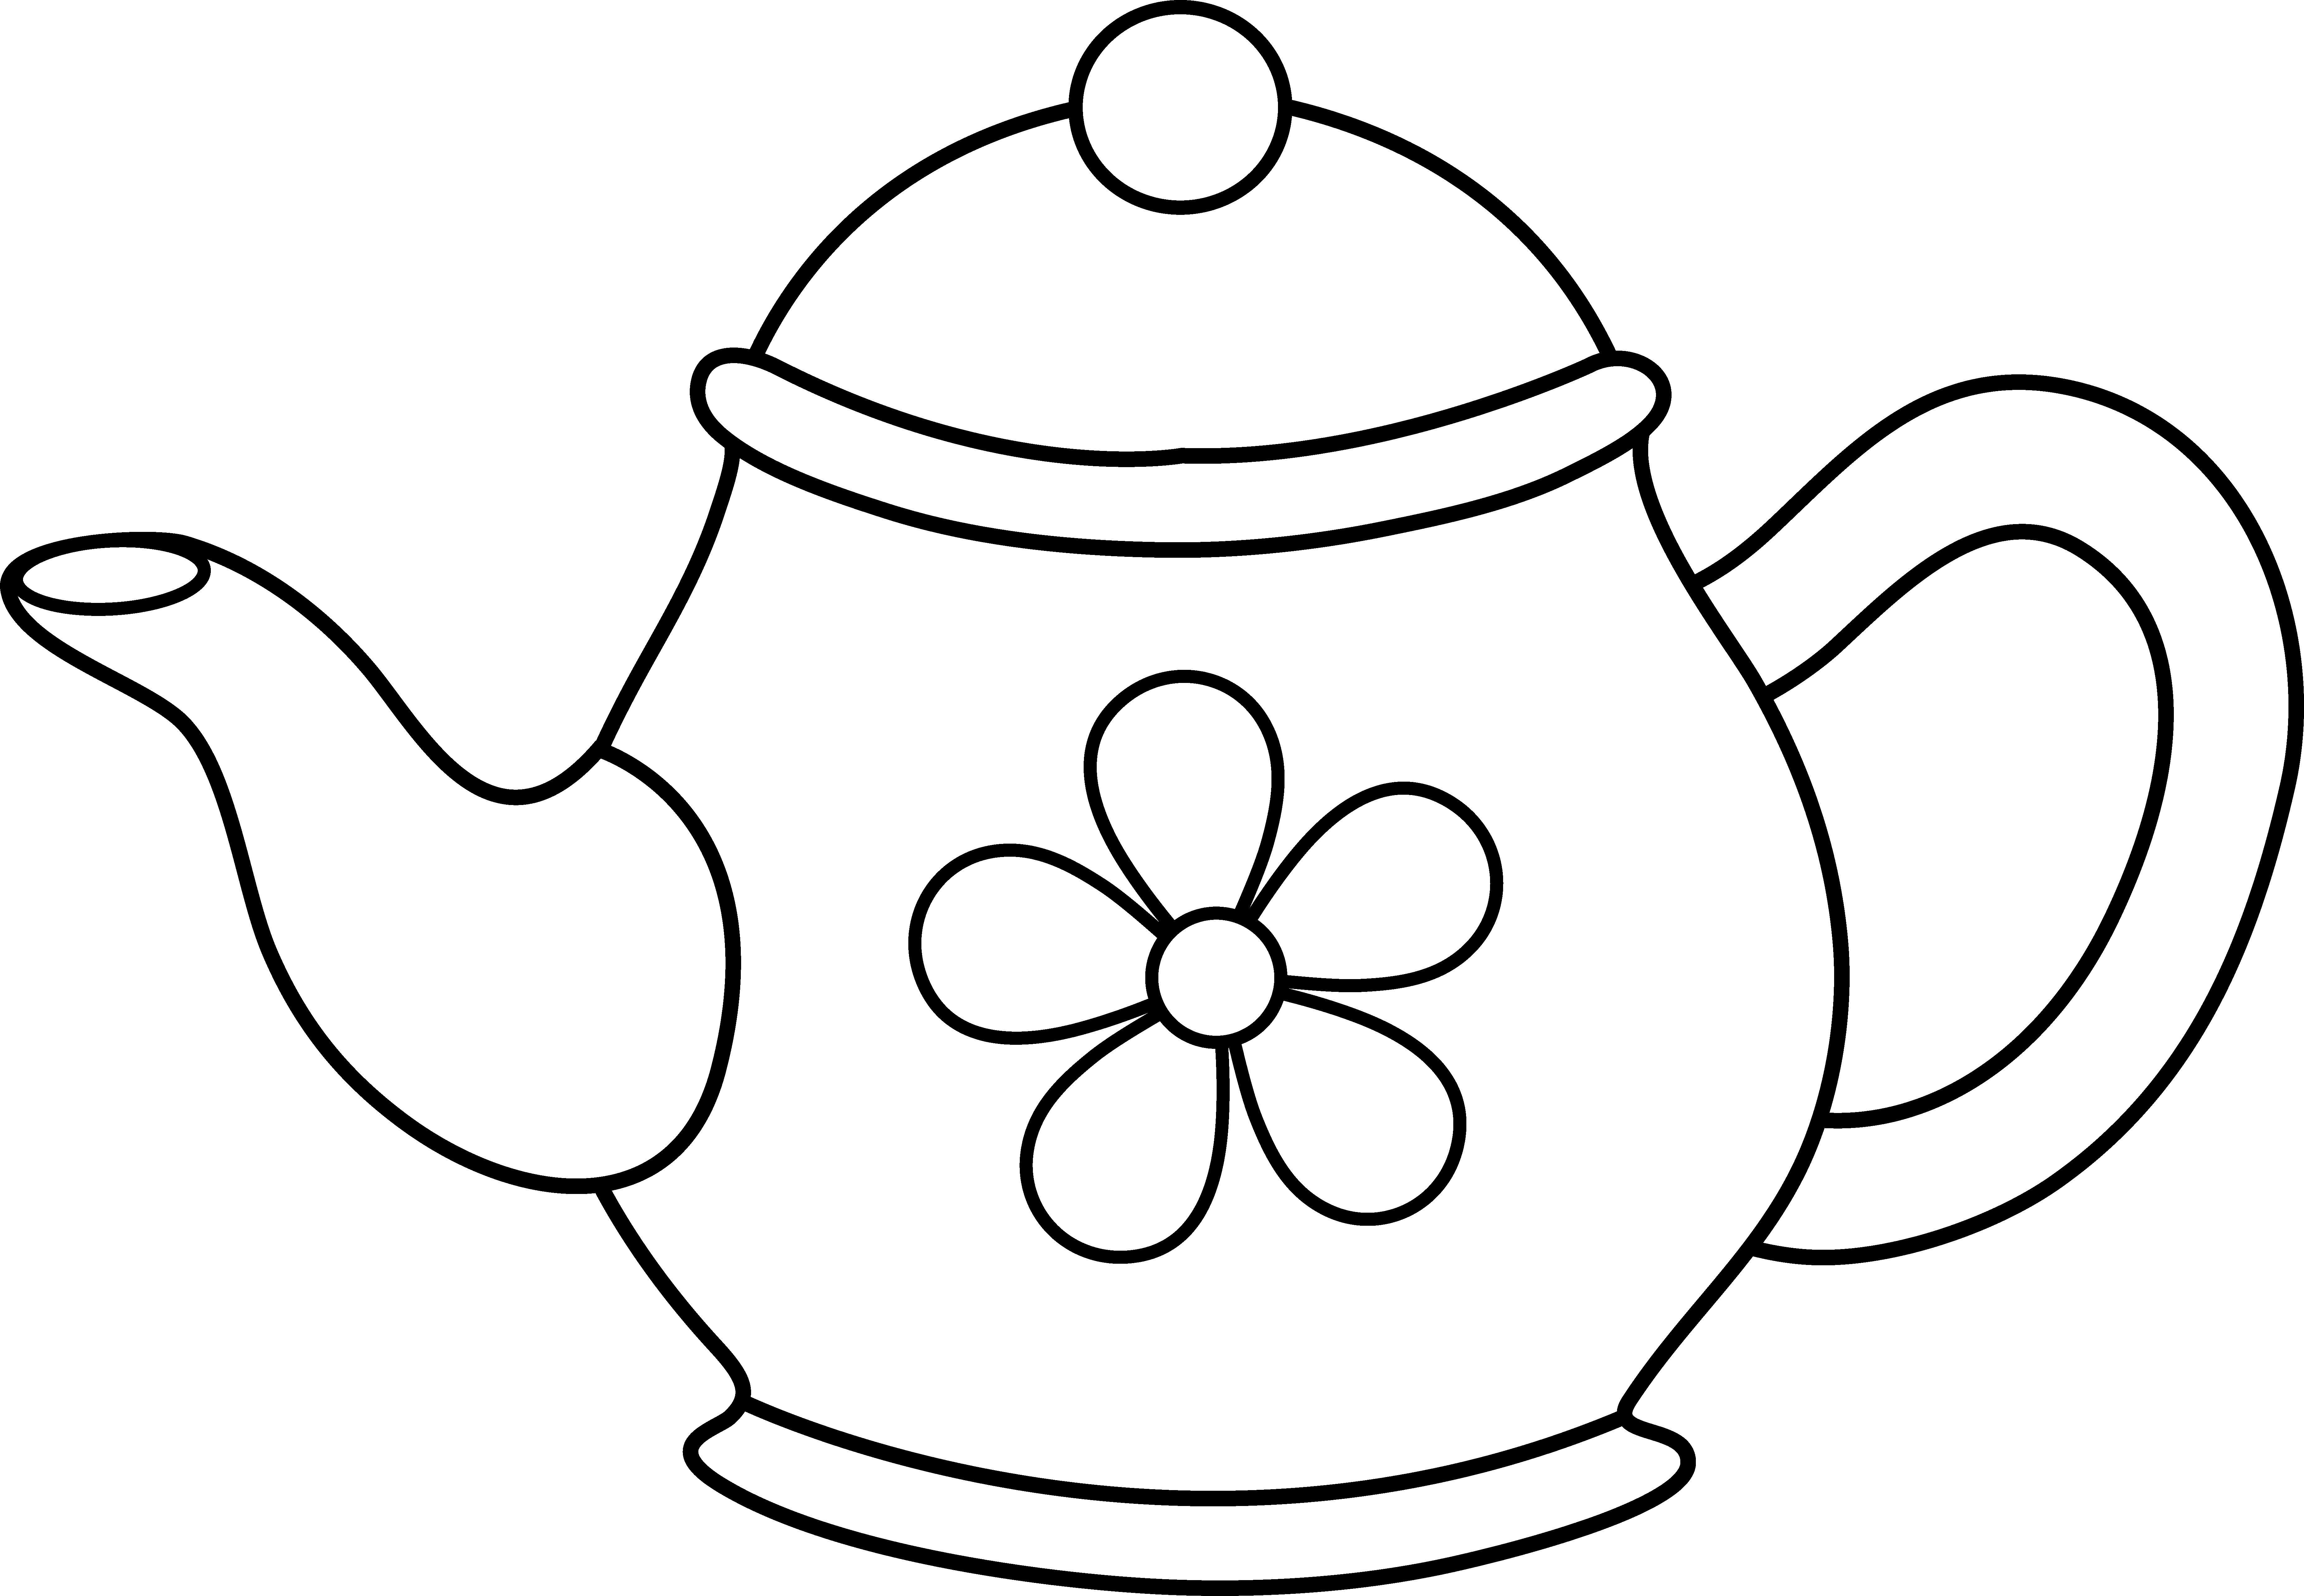 Coloring Picture Of A Teapot - Coloring Pages for Kids and for Adults